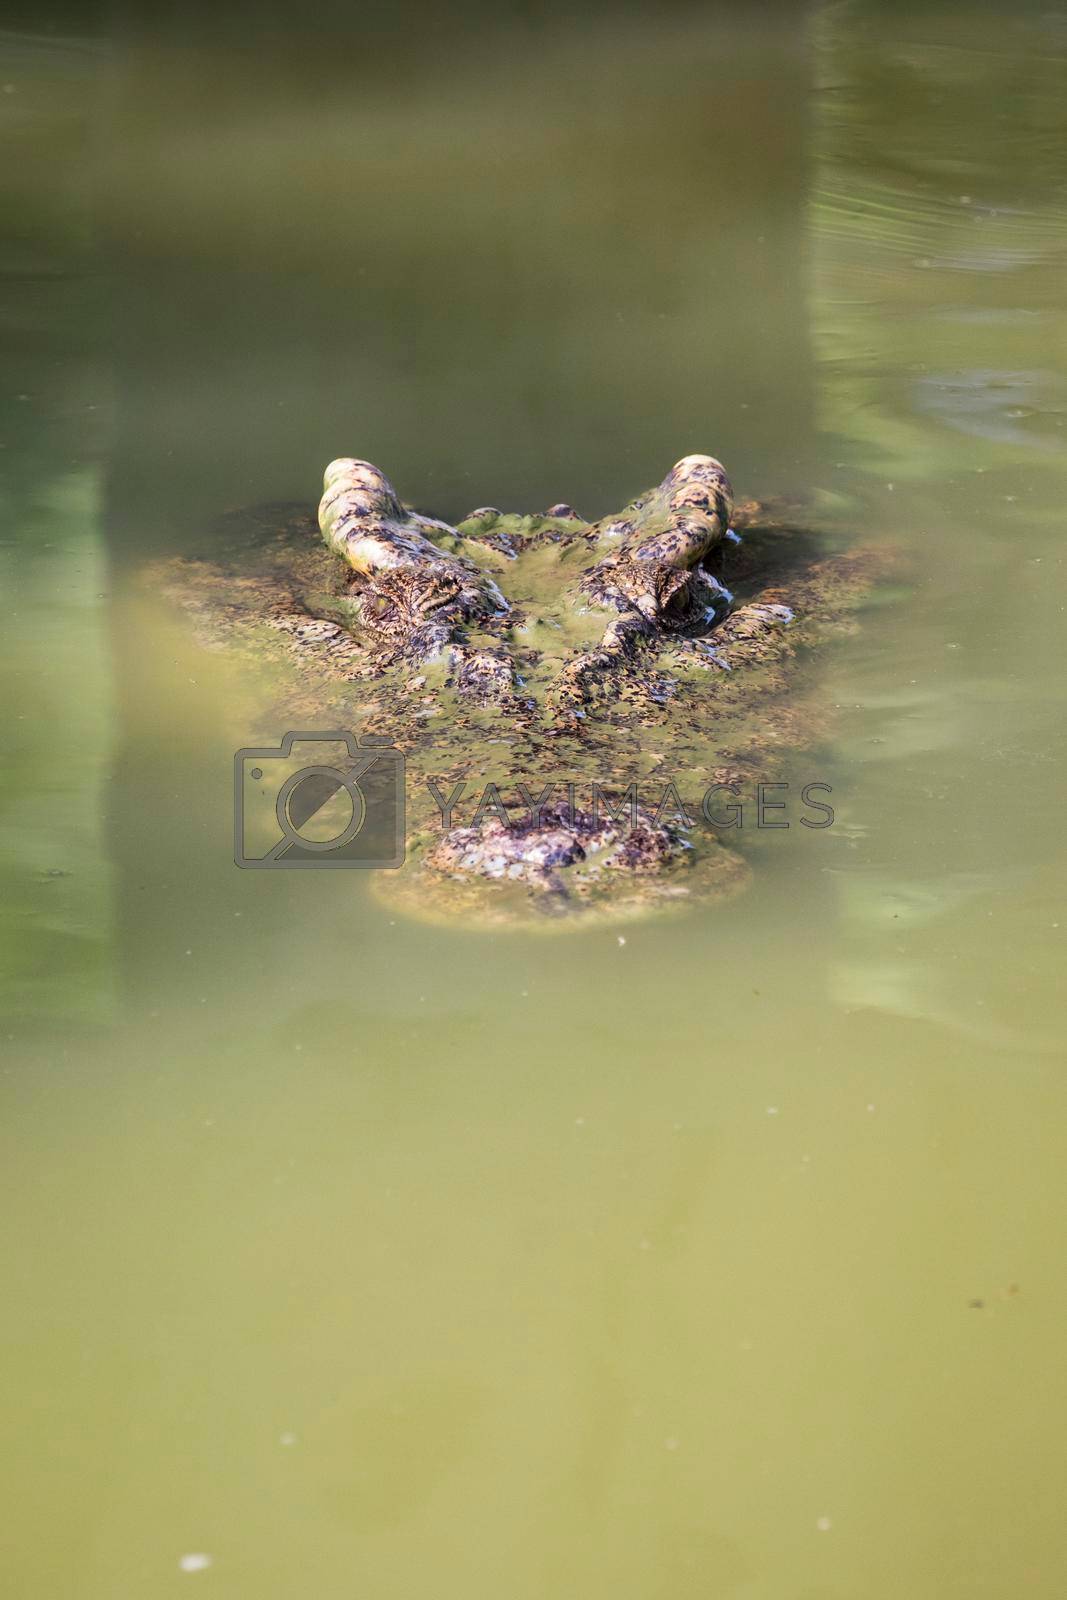 Royalty free image of Image of a crocodile head in the water. Reptile Animals. by yod67